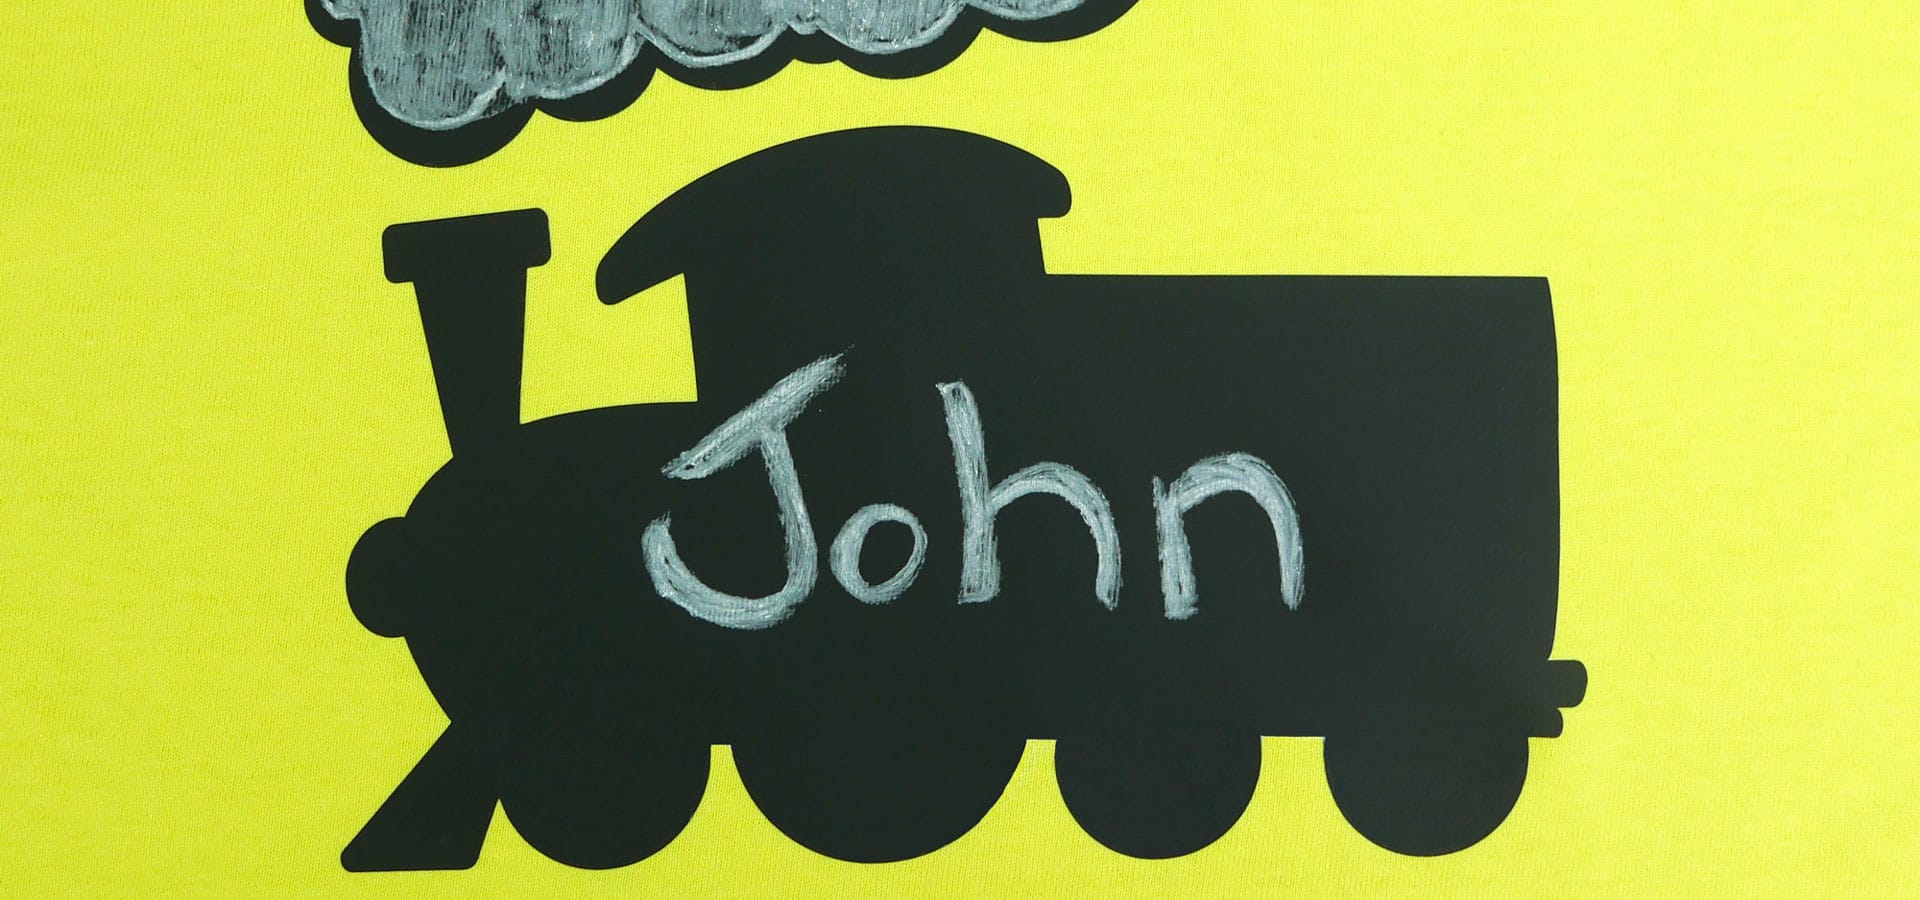 A train silhouette made with Chalkboard with the name "John" written on it in chalk.